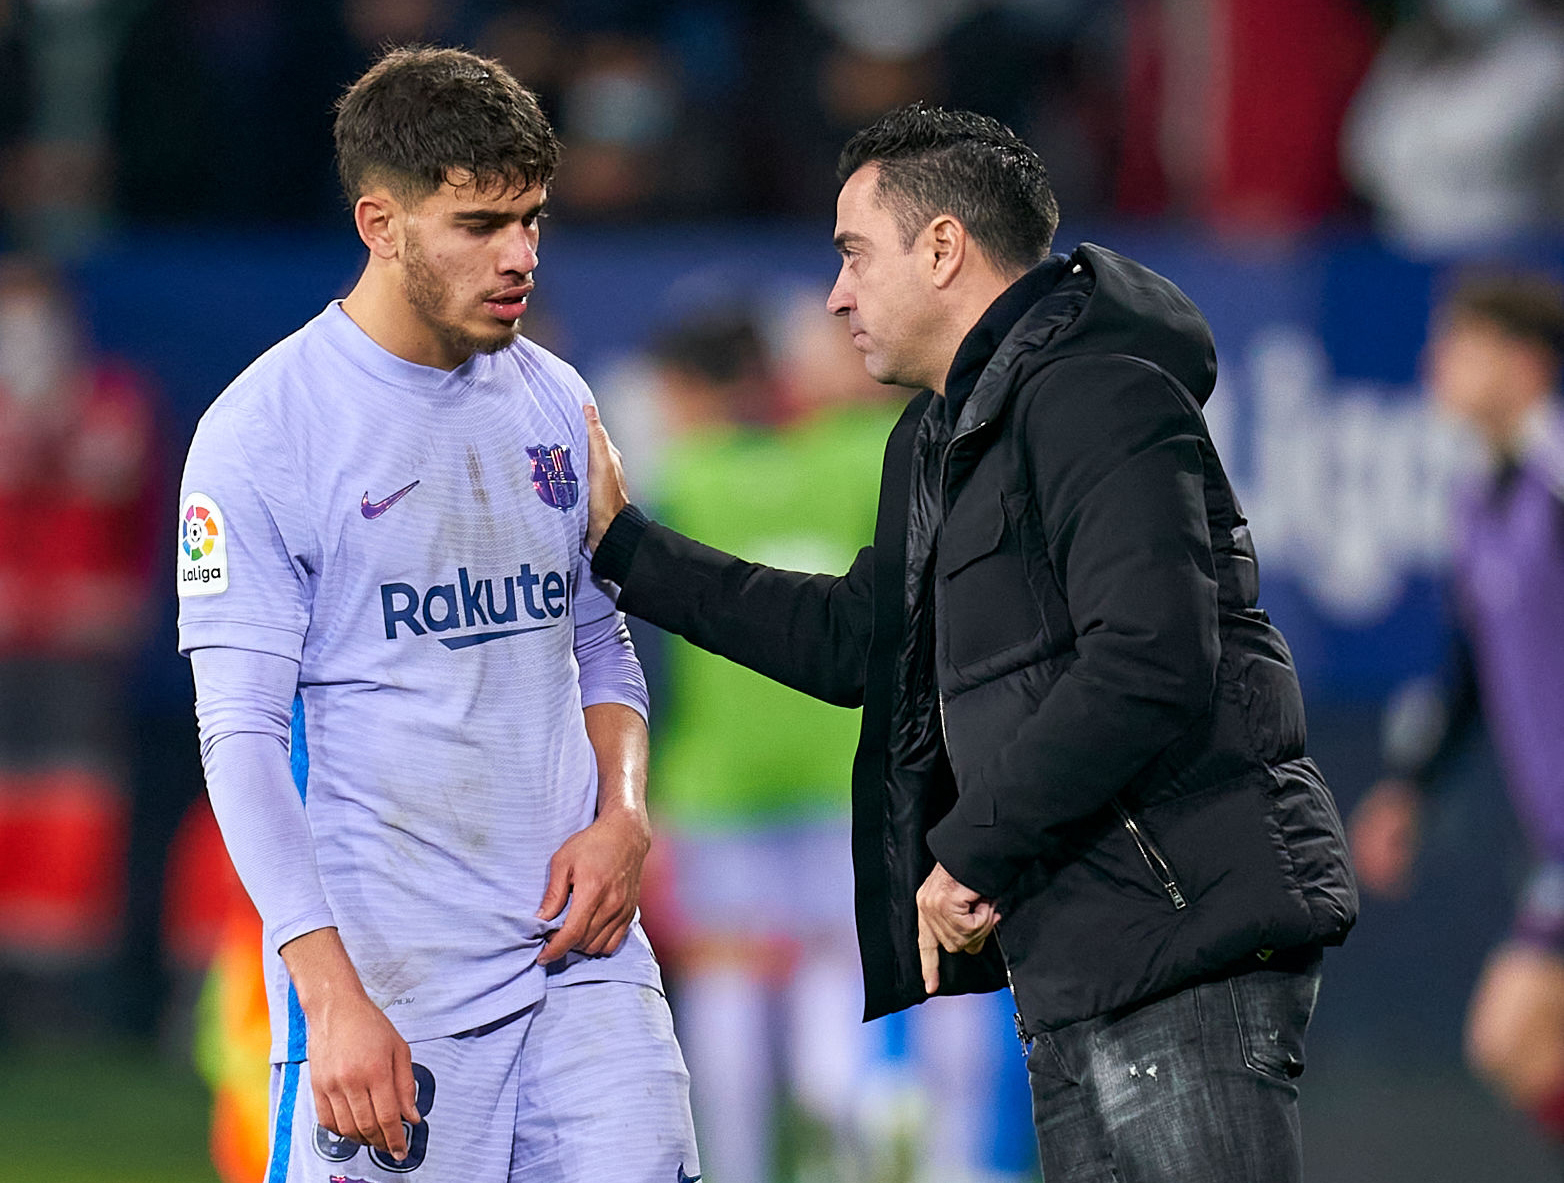 PAMPLONA, SPAIN - DECEMBER 12: Xavi Hernandez, Manager of FC Barcelona gives instructions to Abdessamad Ezzalzouli during the La Liga Santander match between CA Osasuna and FC Barcelona at Estadio El Sadar on December 12, 2021 in Pamplona, Spain. (Photo by Quality Sport Images/Getty Images)